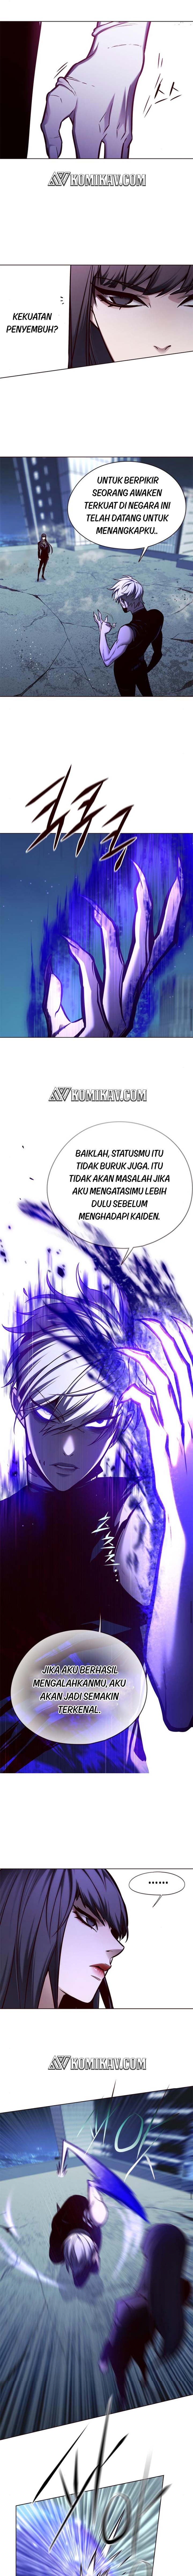 Eleceed Chapter 132